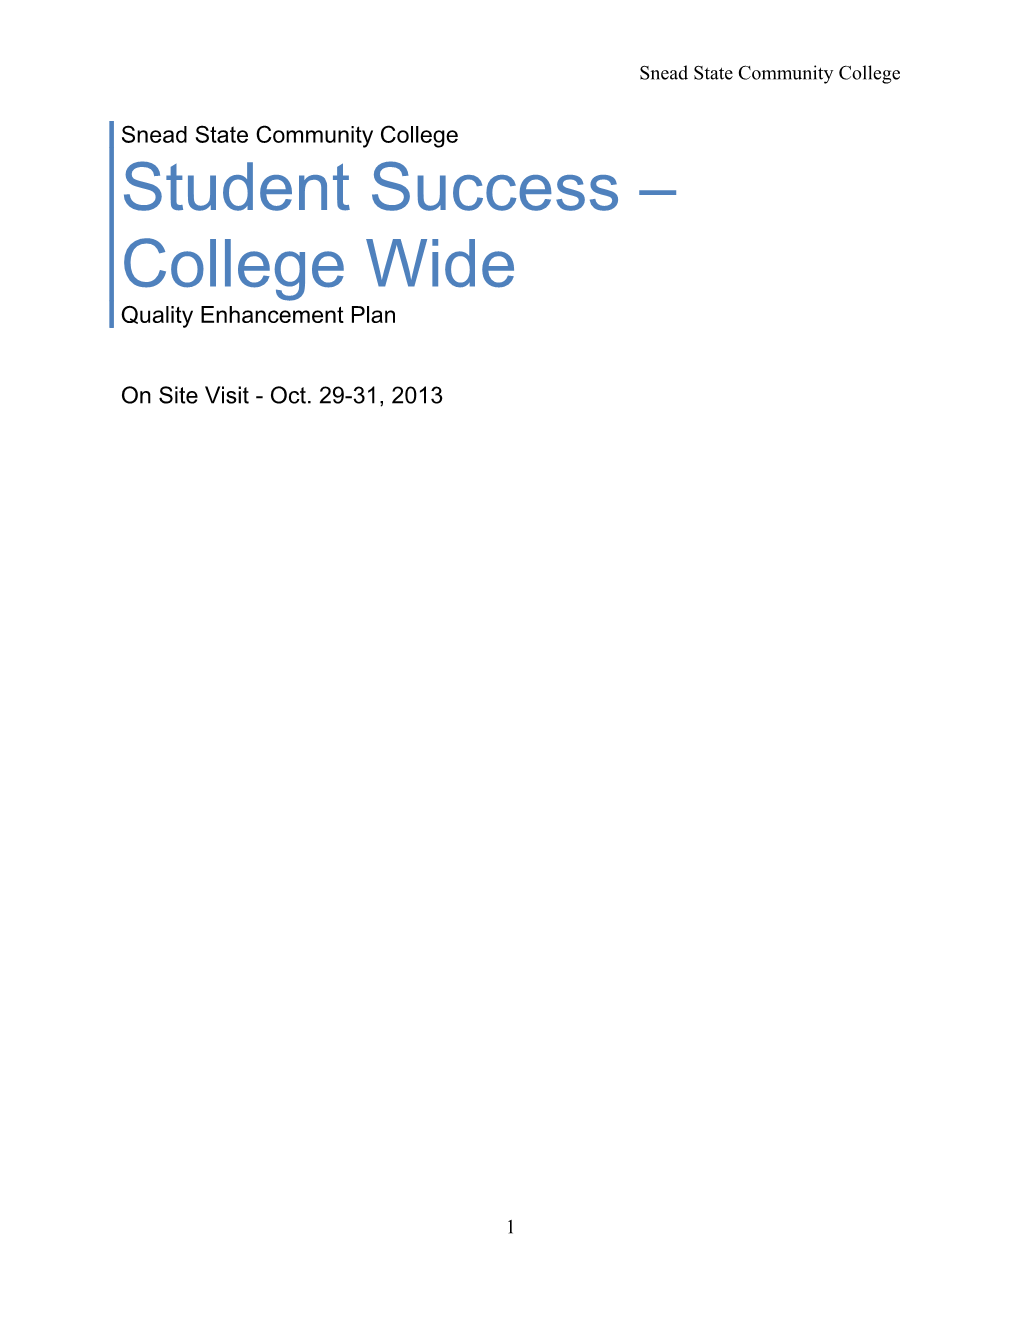 Student Success College Wide